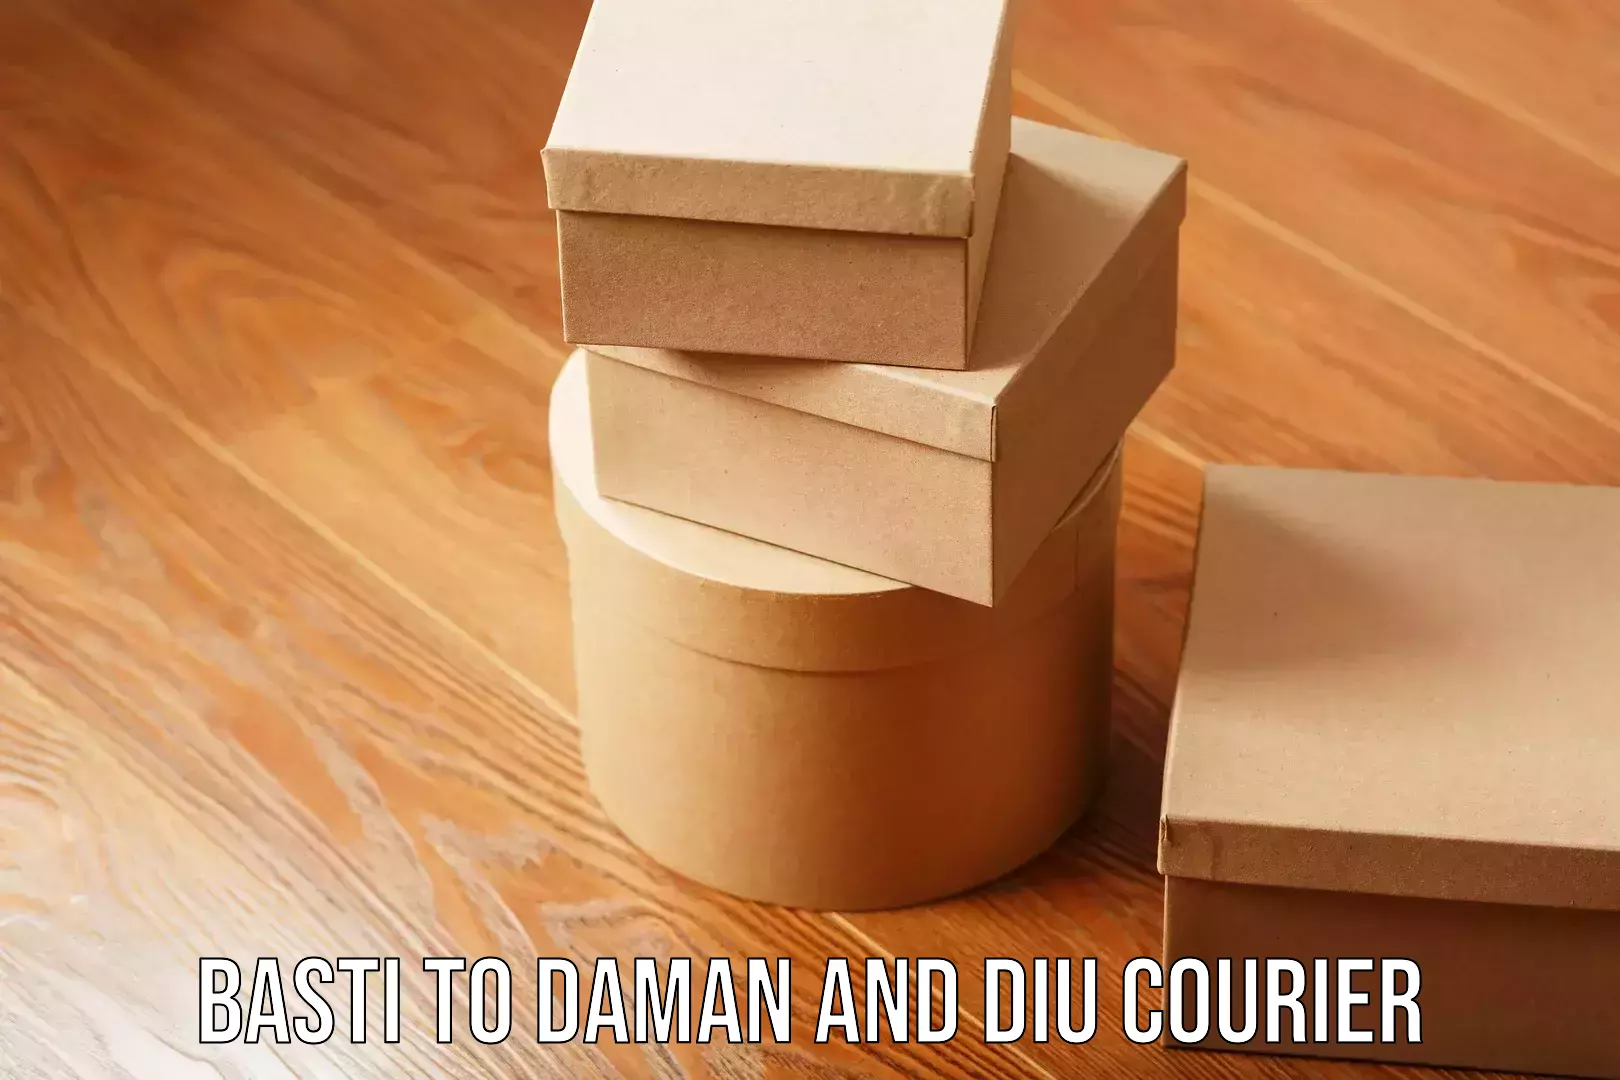 State-of-the-art courier technology Basti to Daman and Diu